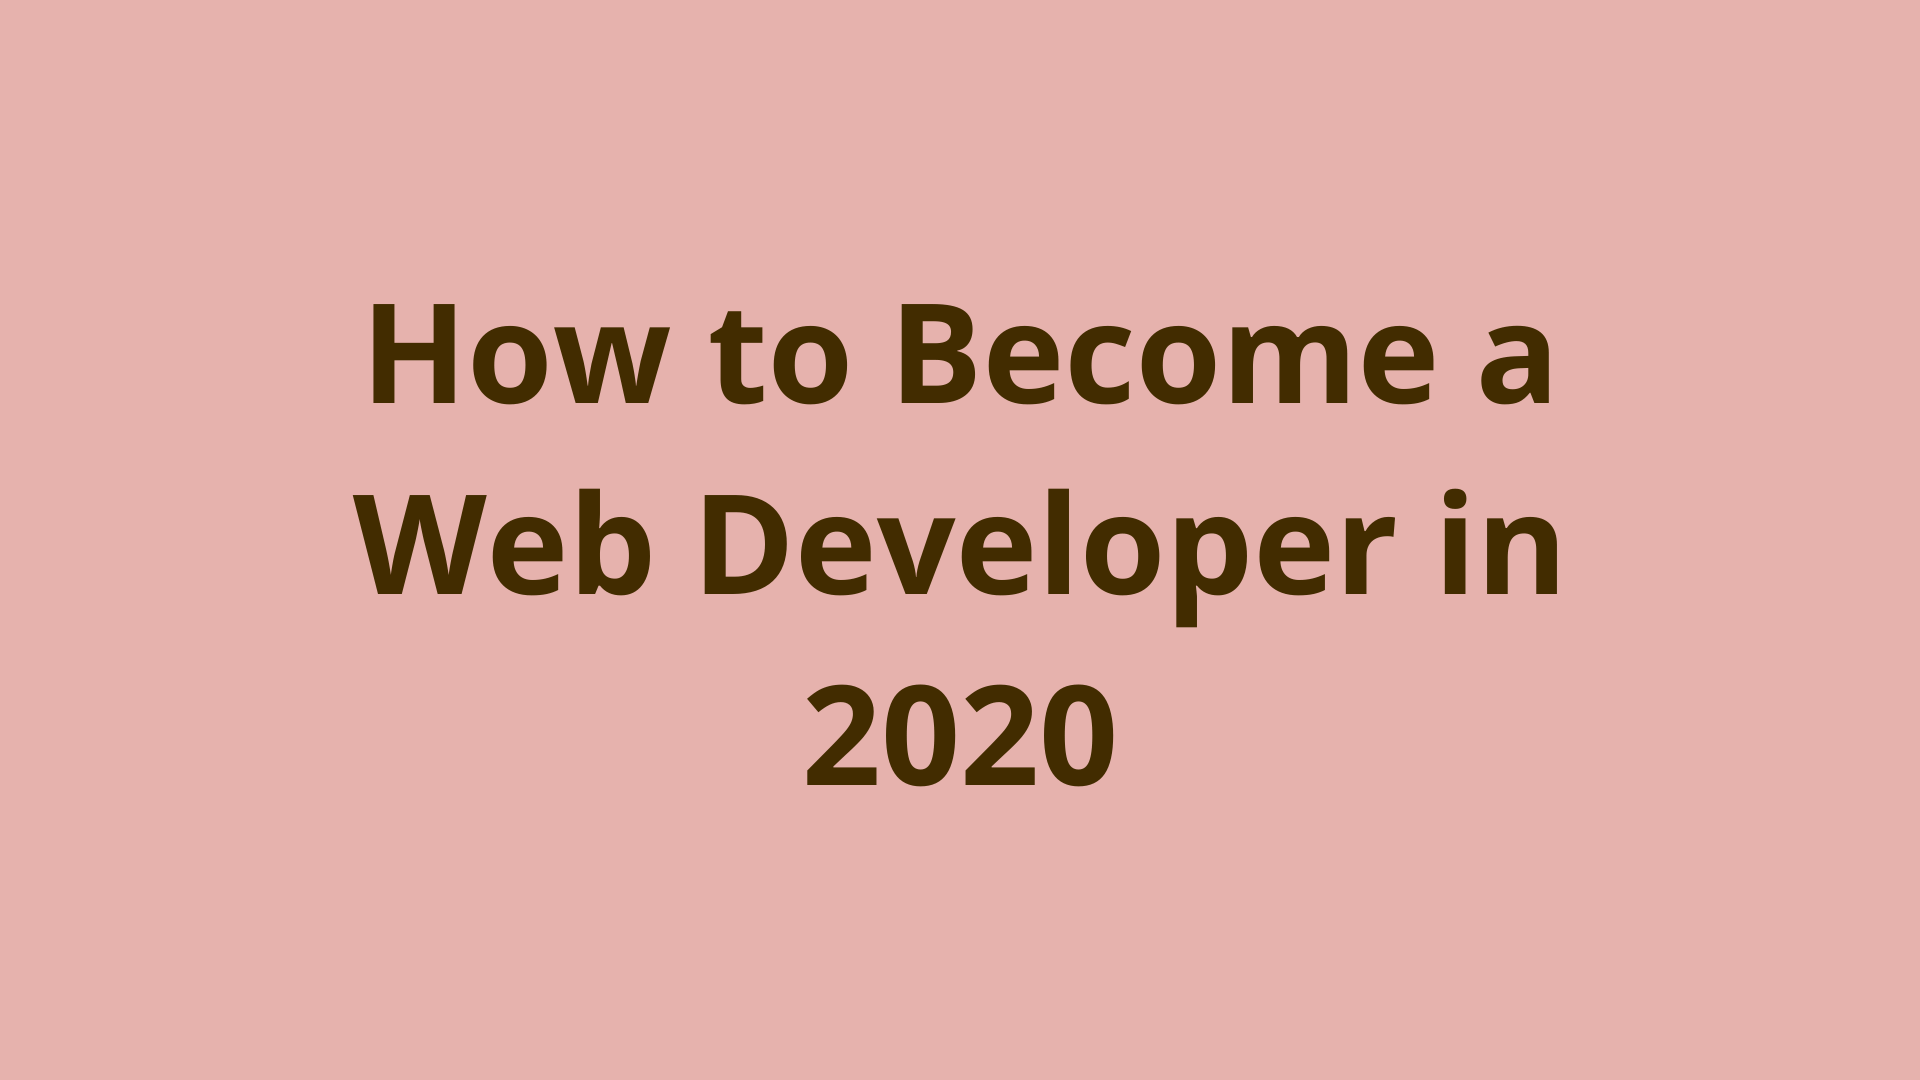 Image of How to become a web developer in 2020